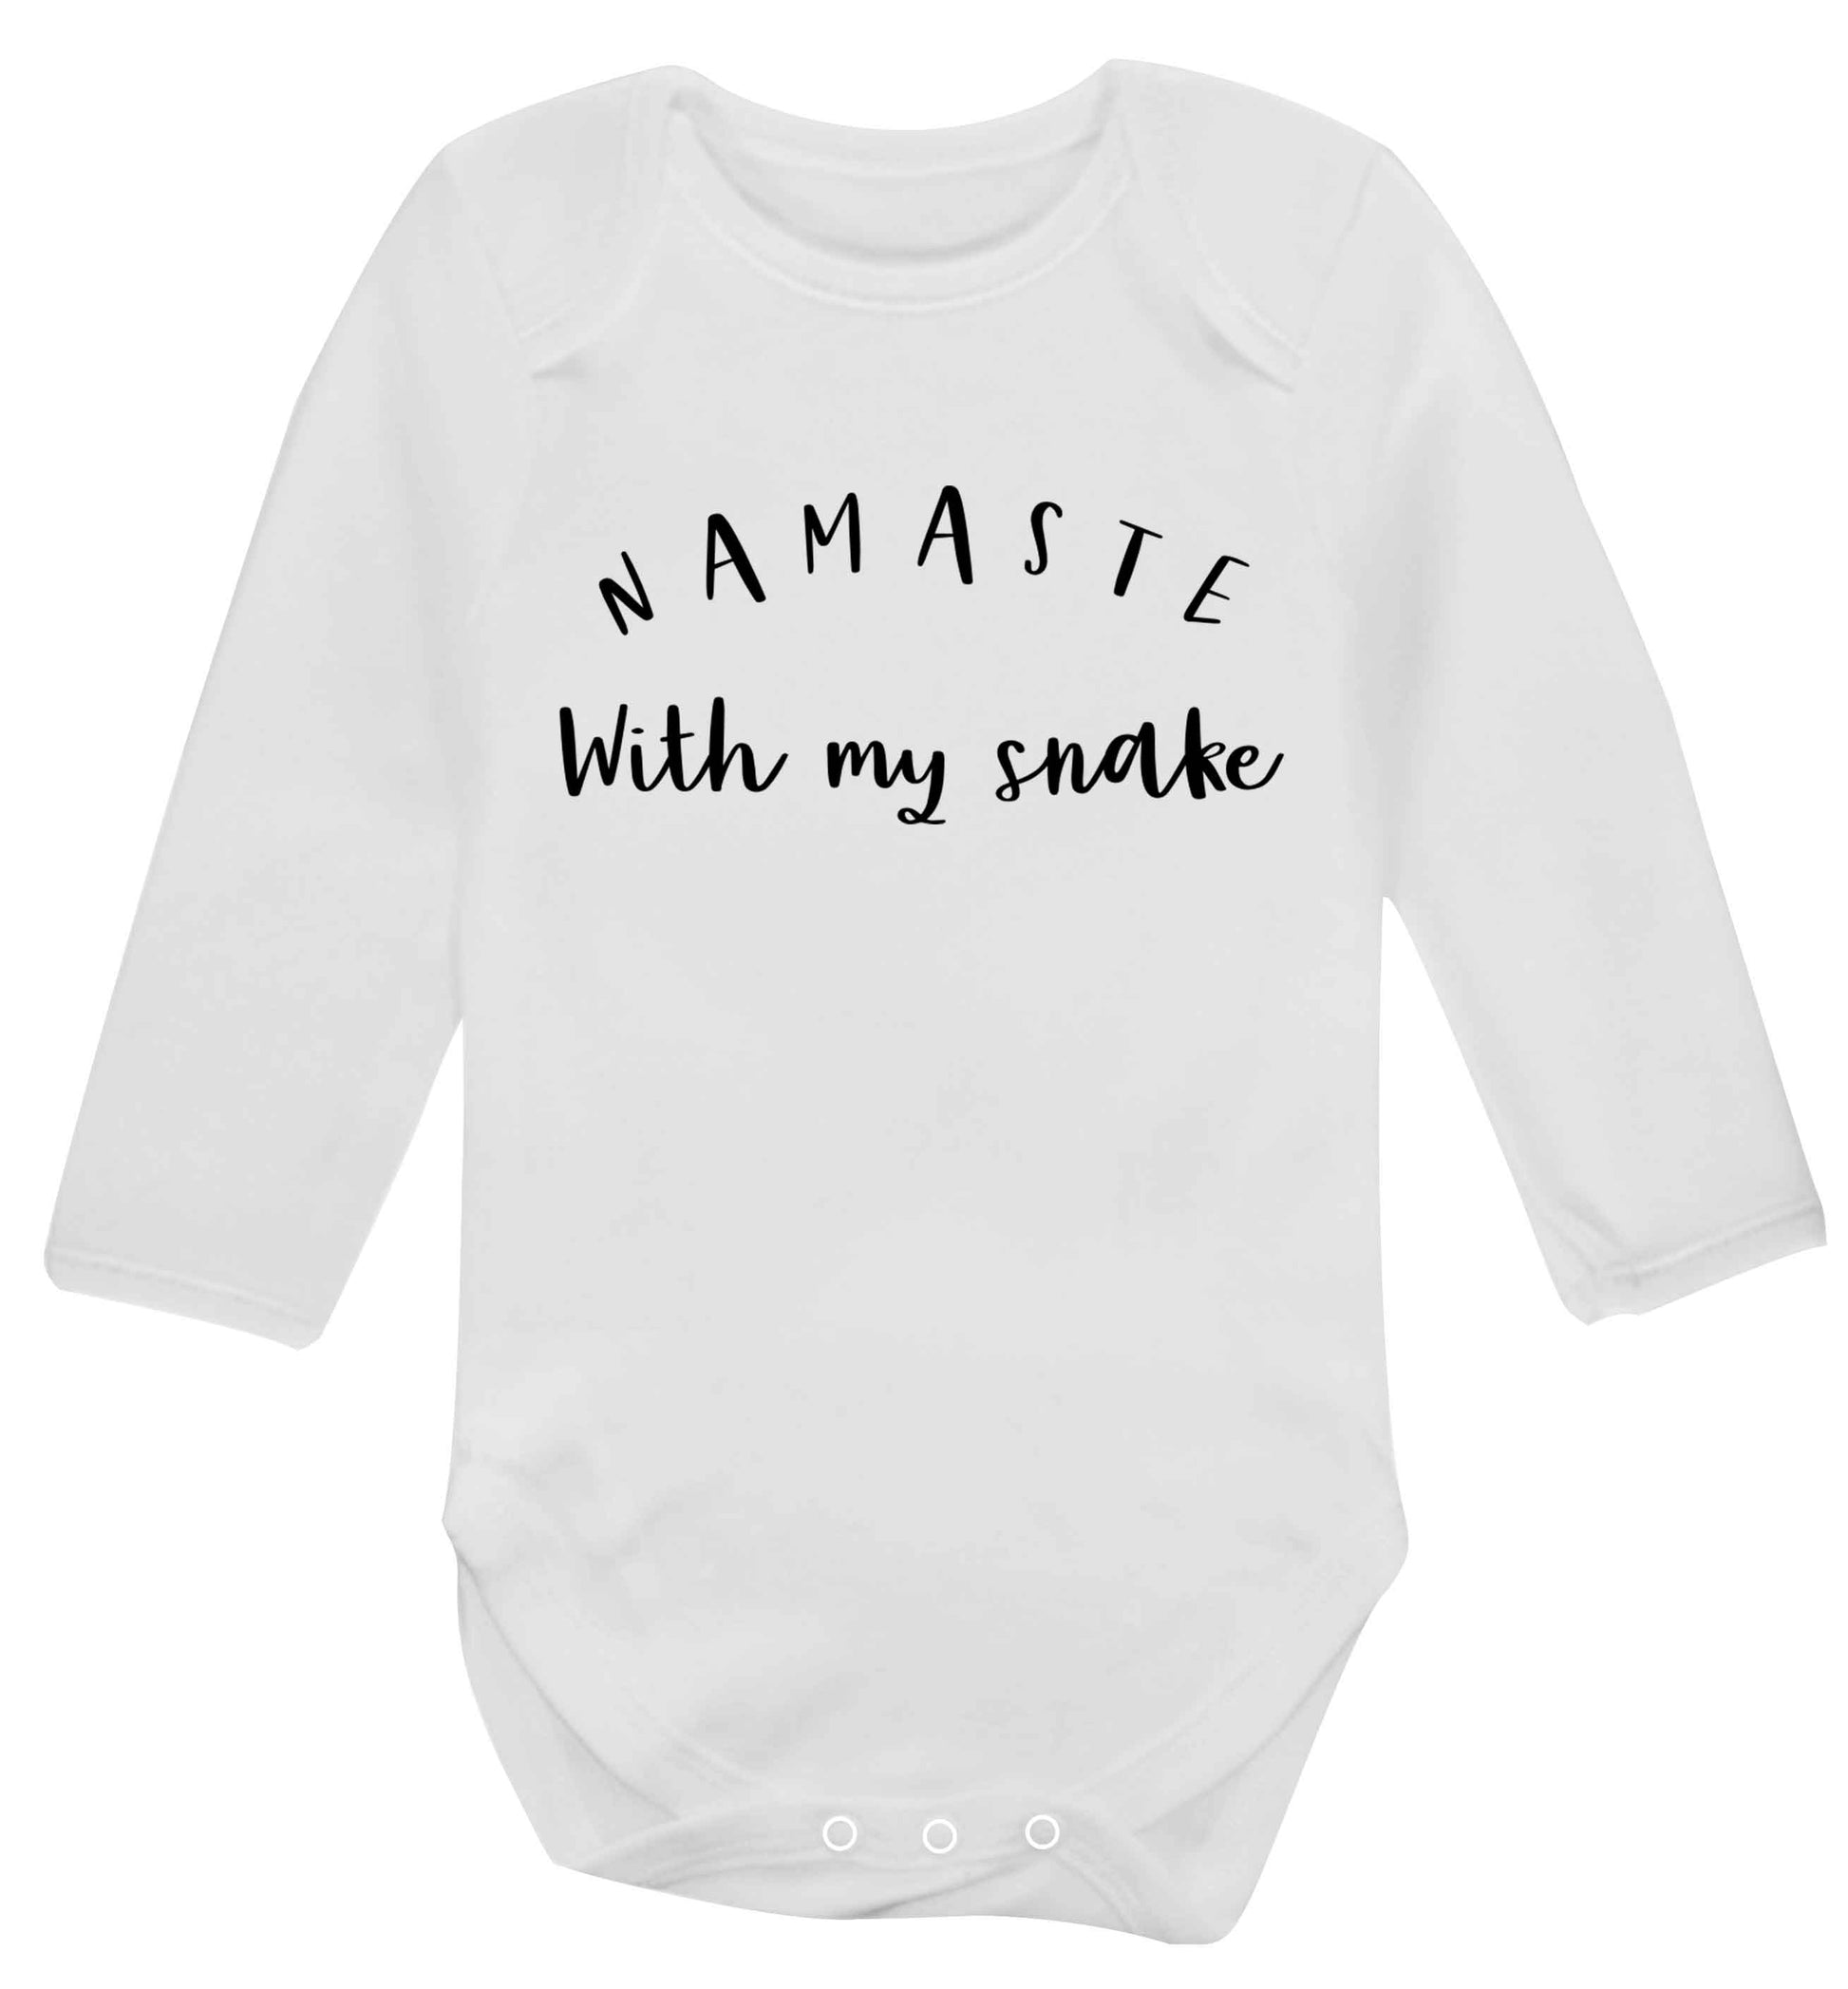 Namaste with my snake Baby Vest long sleeved white 6-12 months